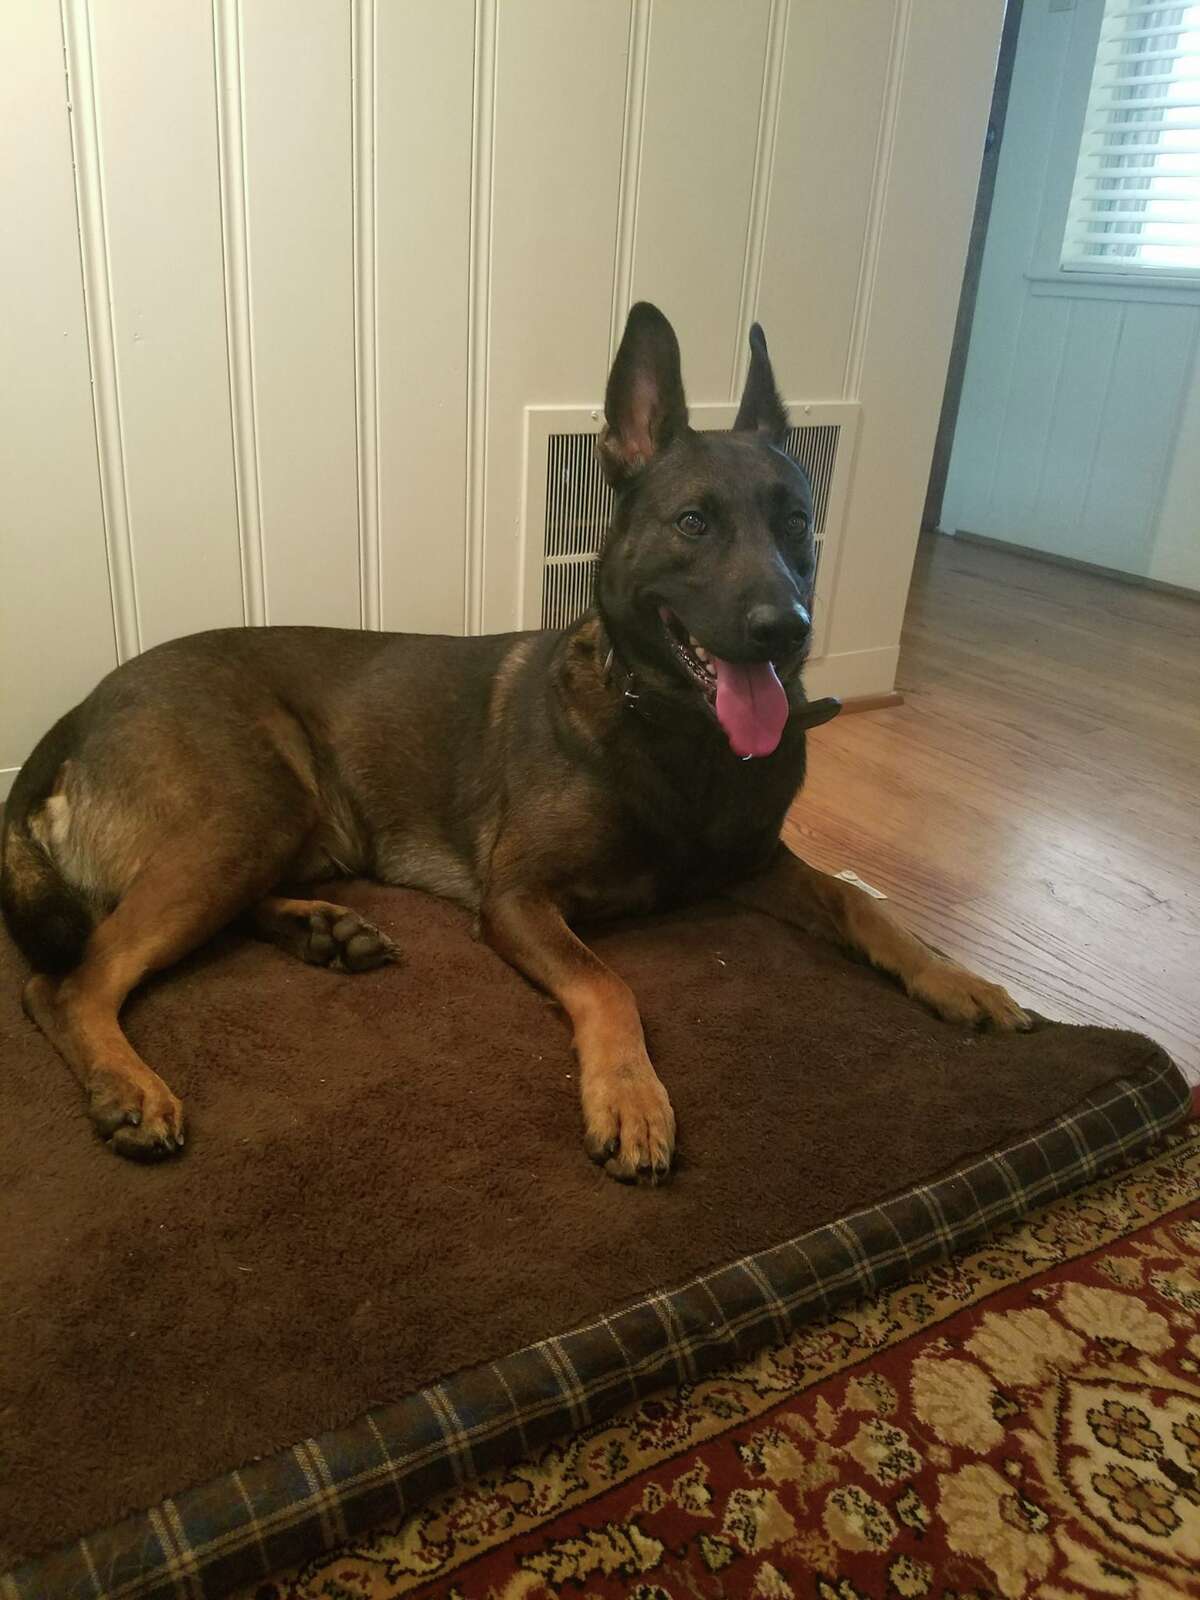 K9 Rudy, the Fort Bend County Sheriff's Office police dog, was recently bit by a venomous snake but is expected to make a full recovery.